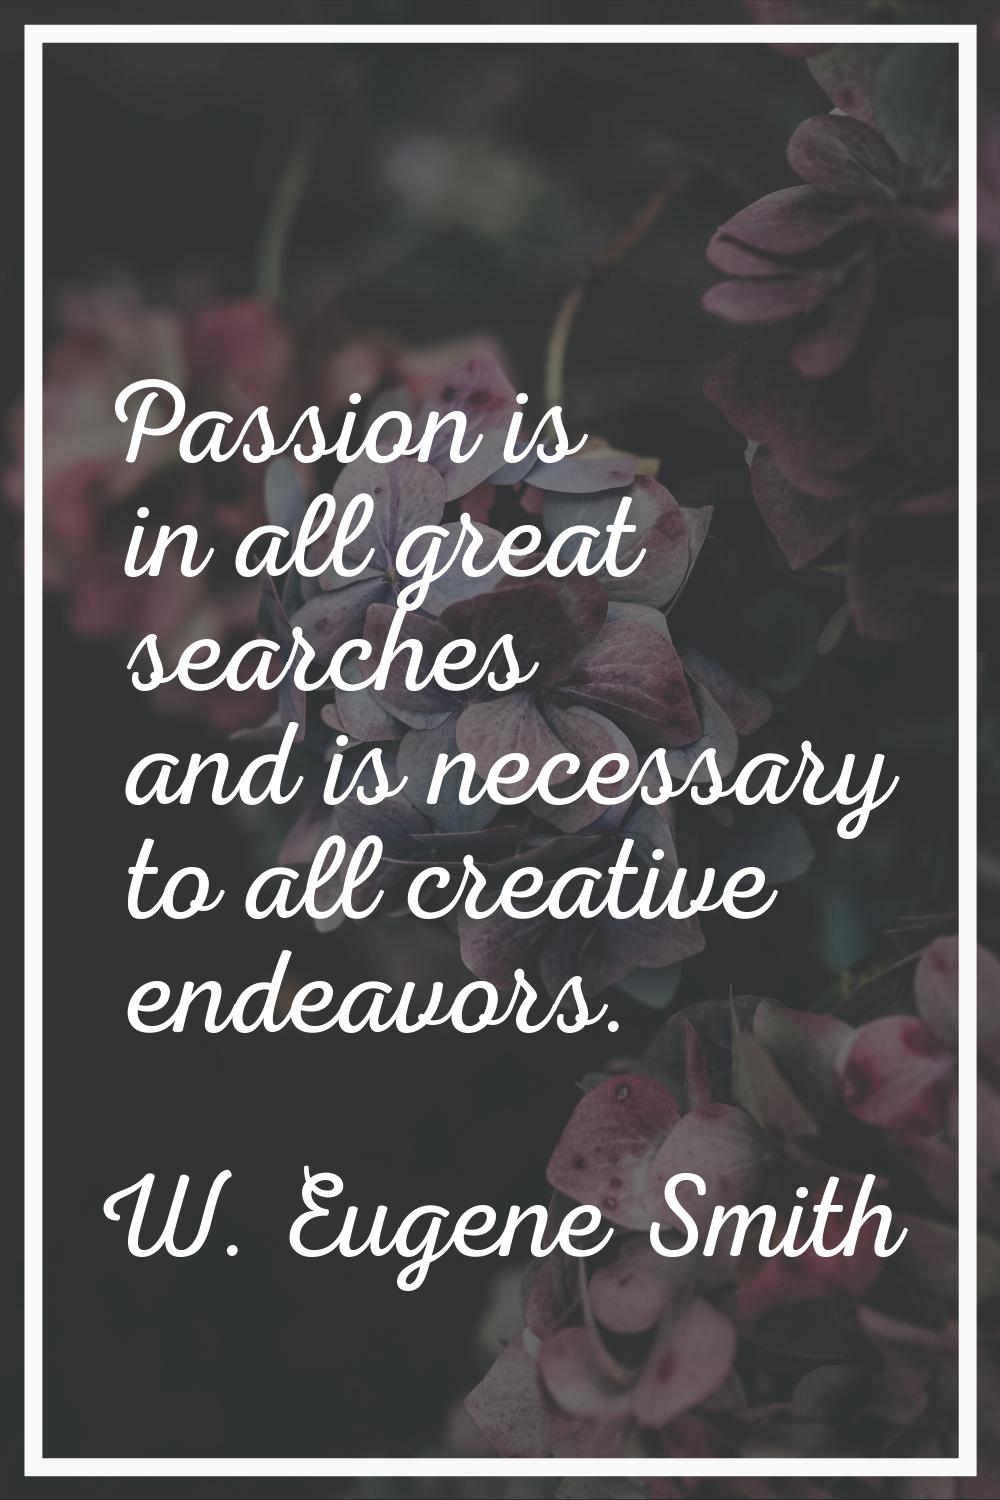 Passion is in all great searches and is necessary to all creative endeavors.